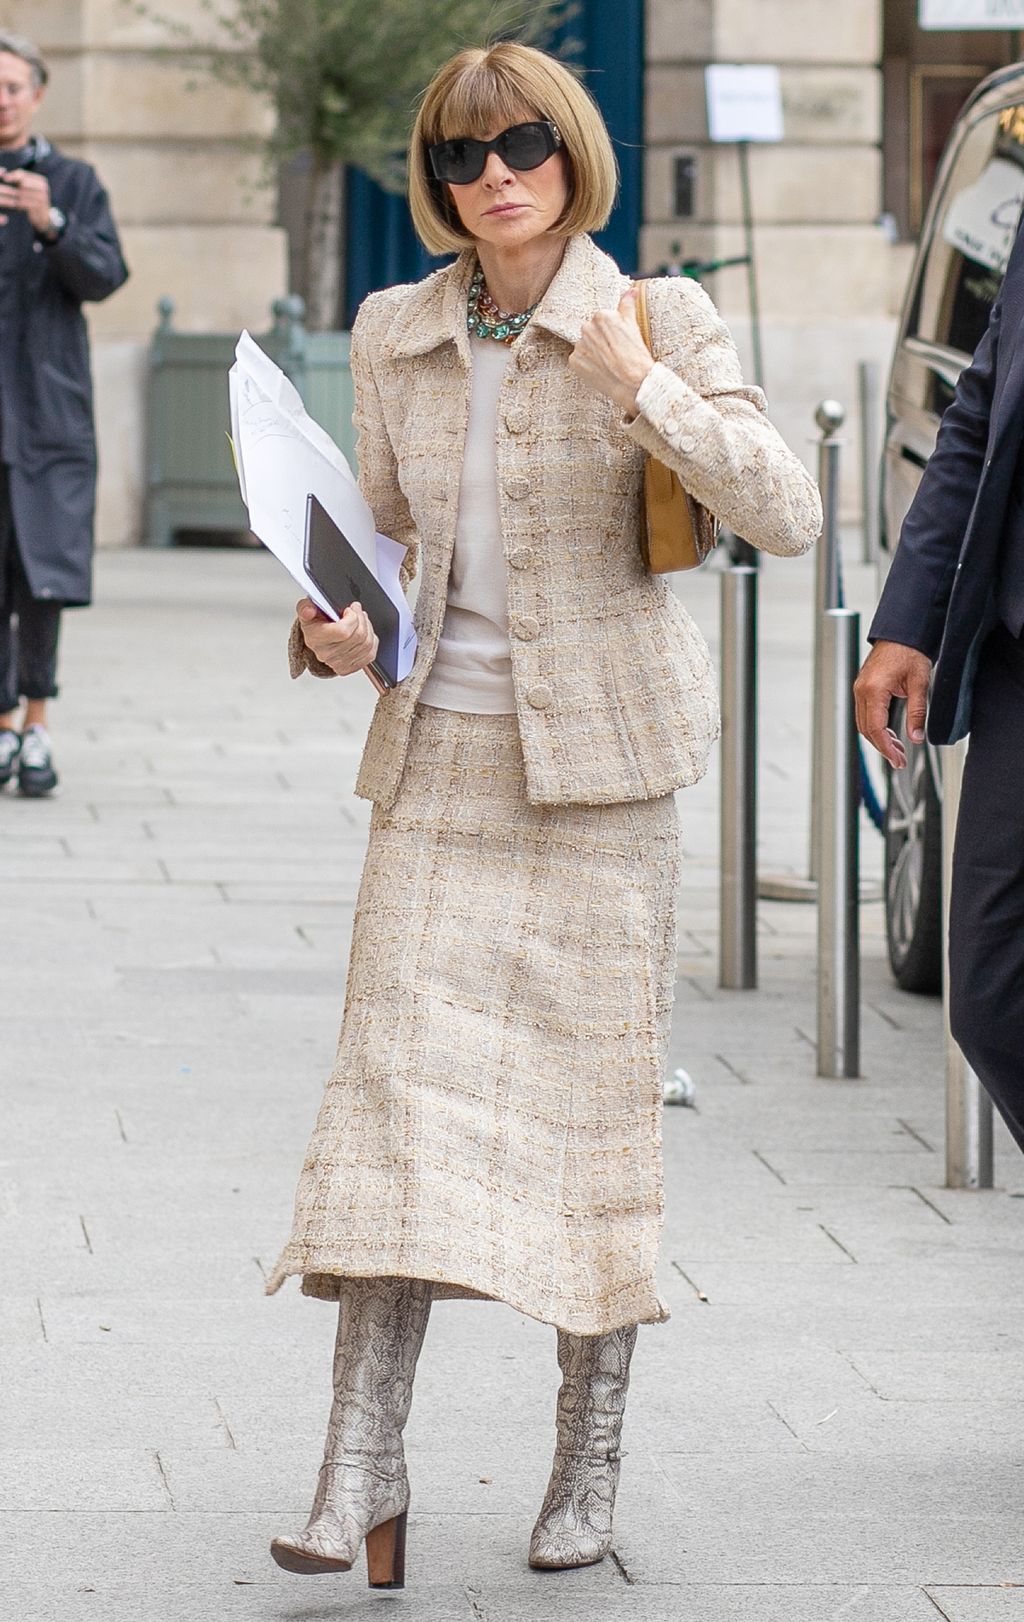 Anna Wintour's Capsule Wardrobe She Always Packs for Paris | Who What Wear